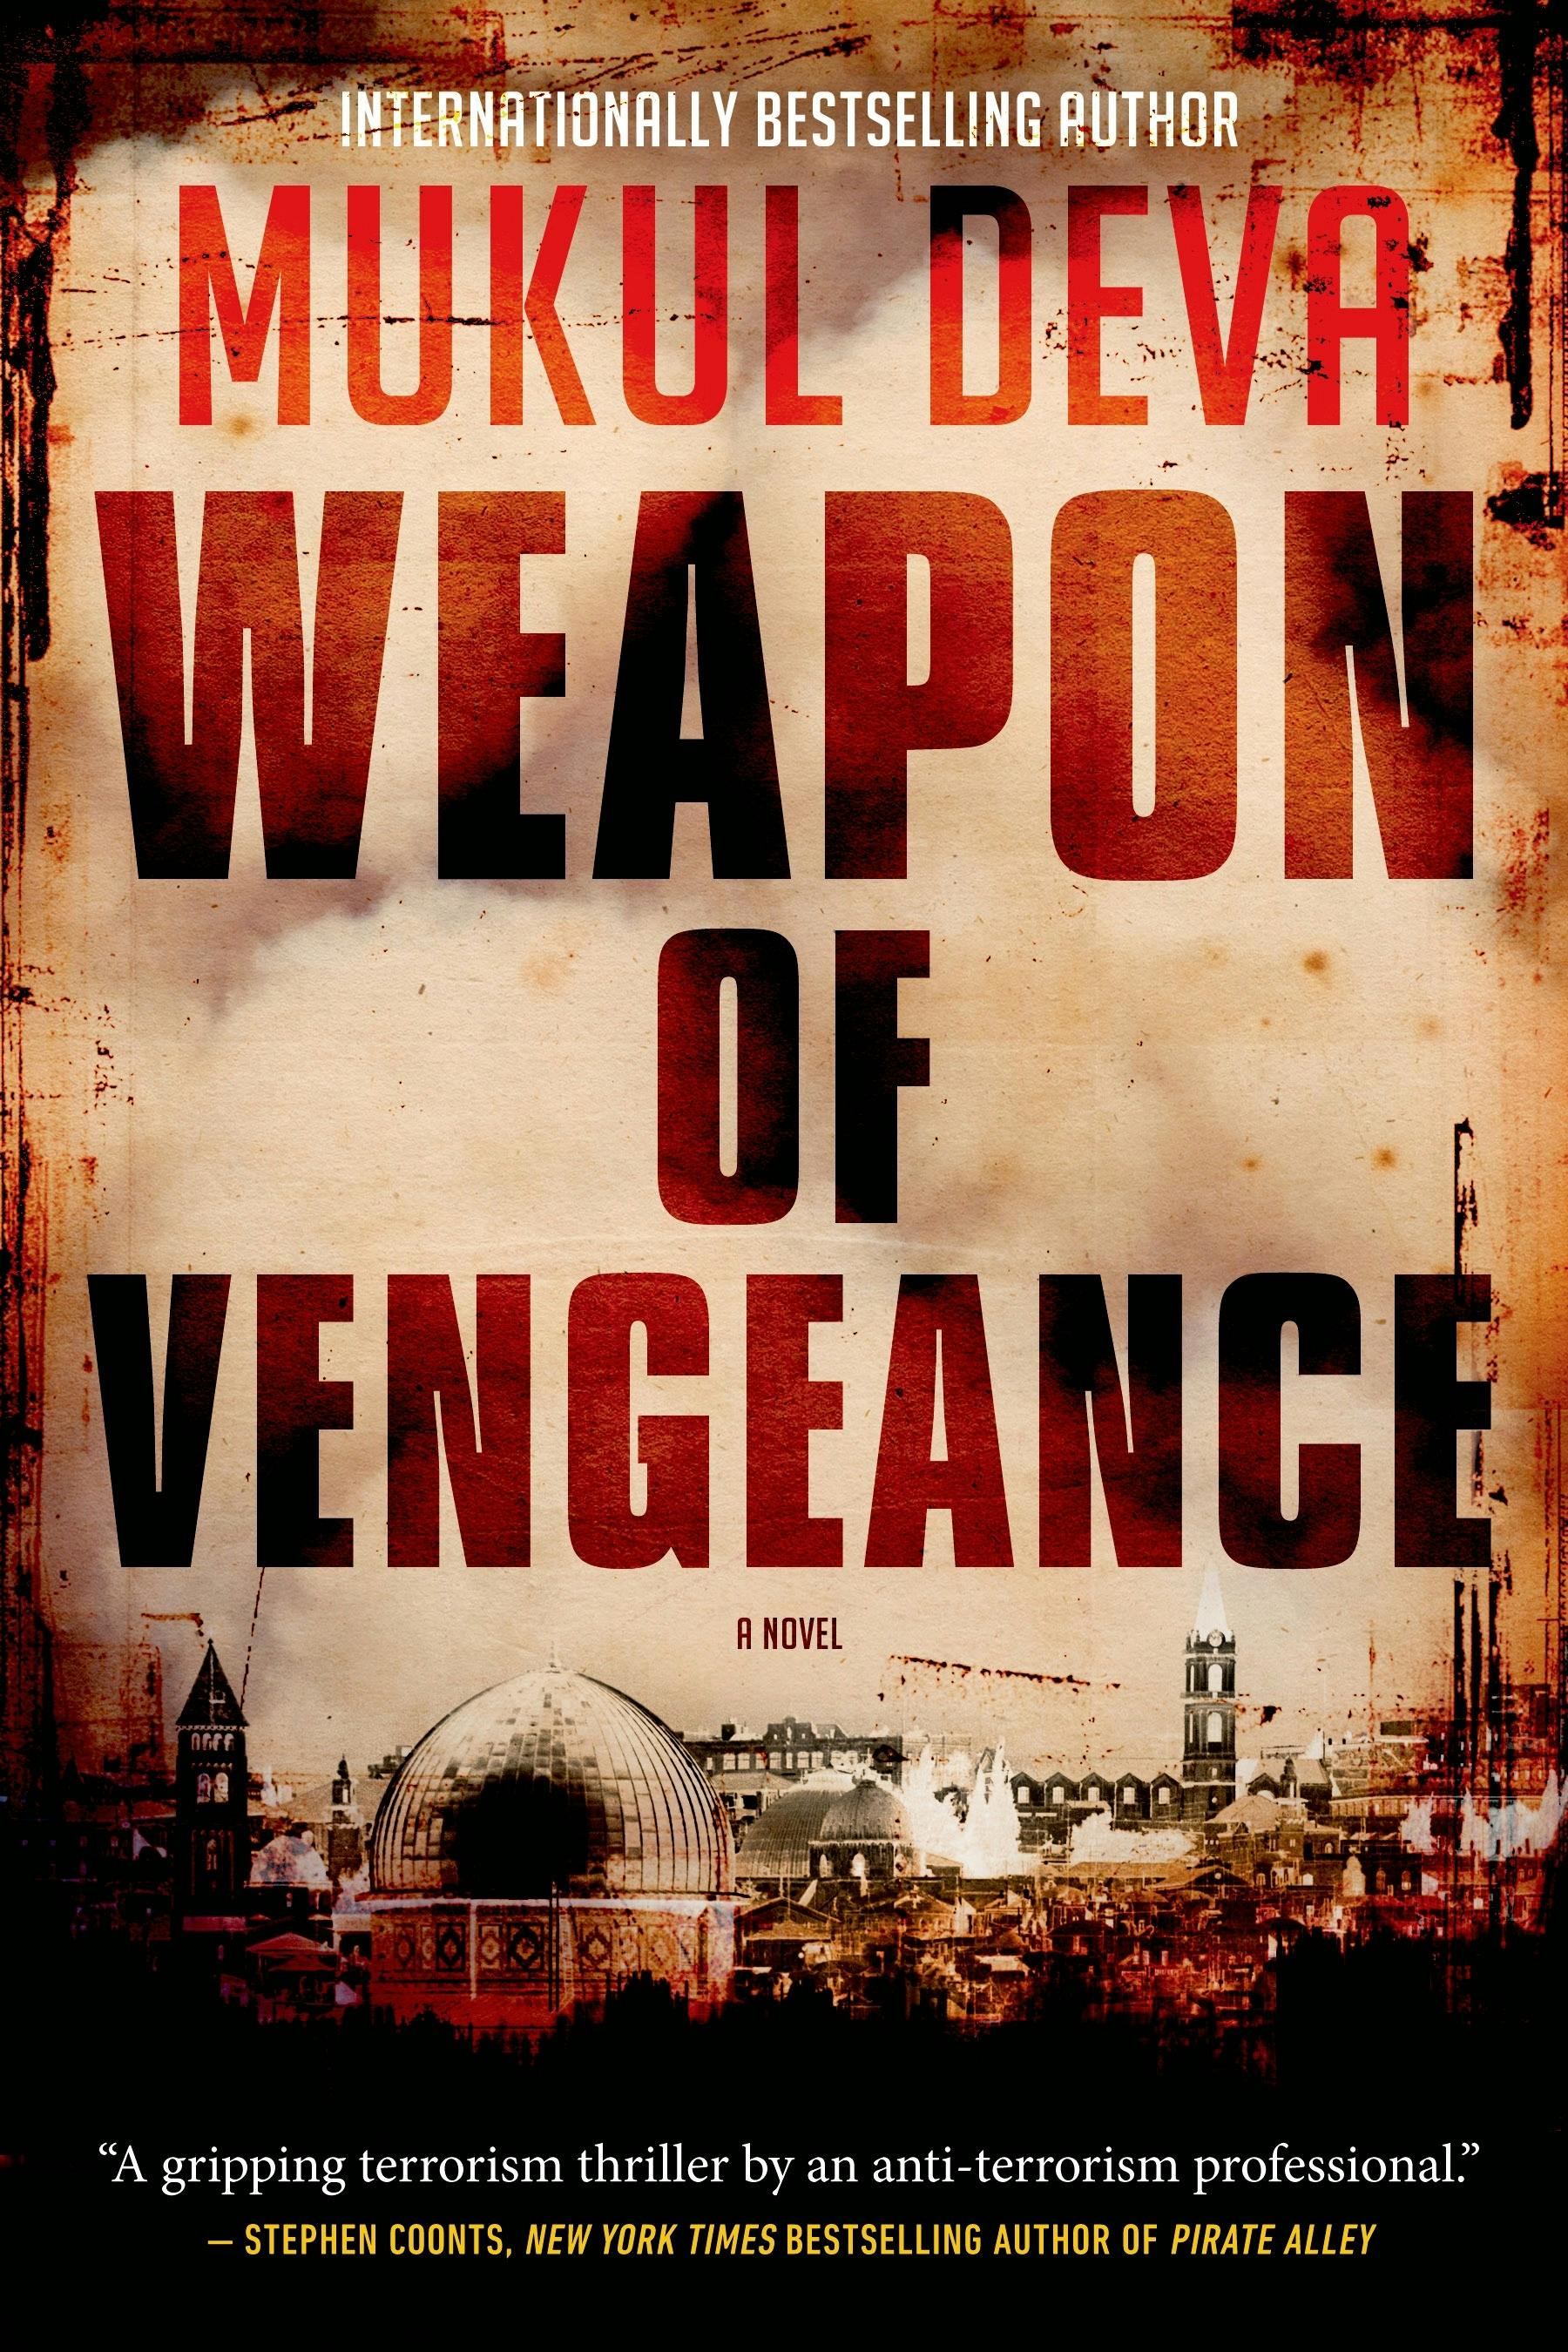 Cover for the book titled as: Weapon of Vengeance